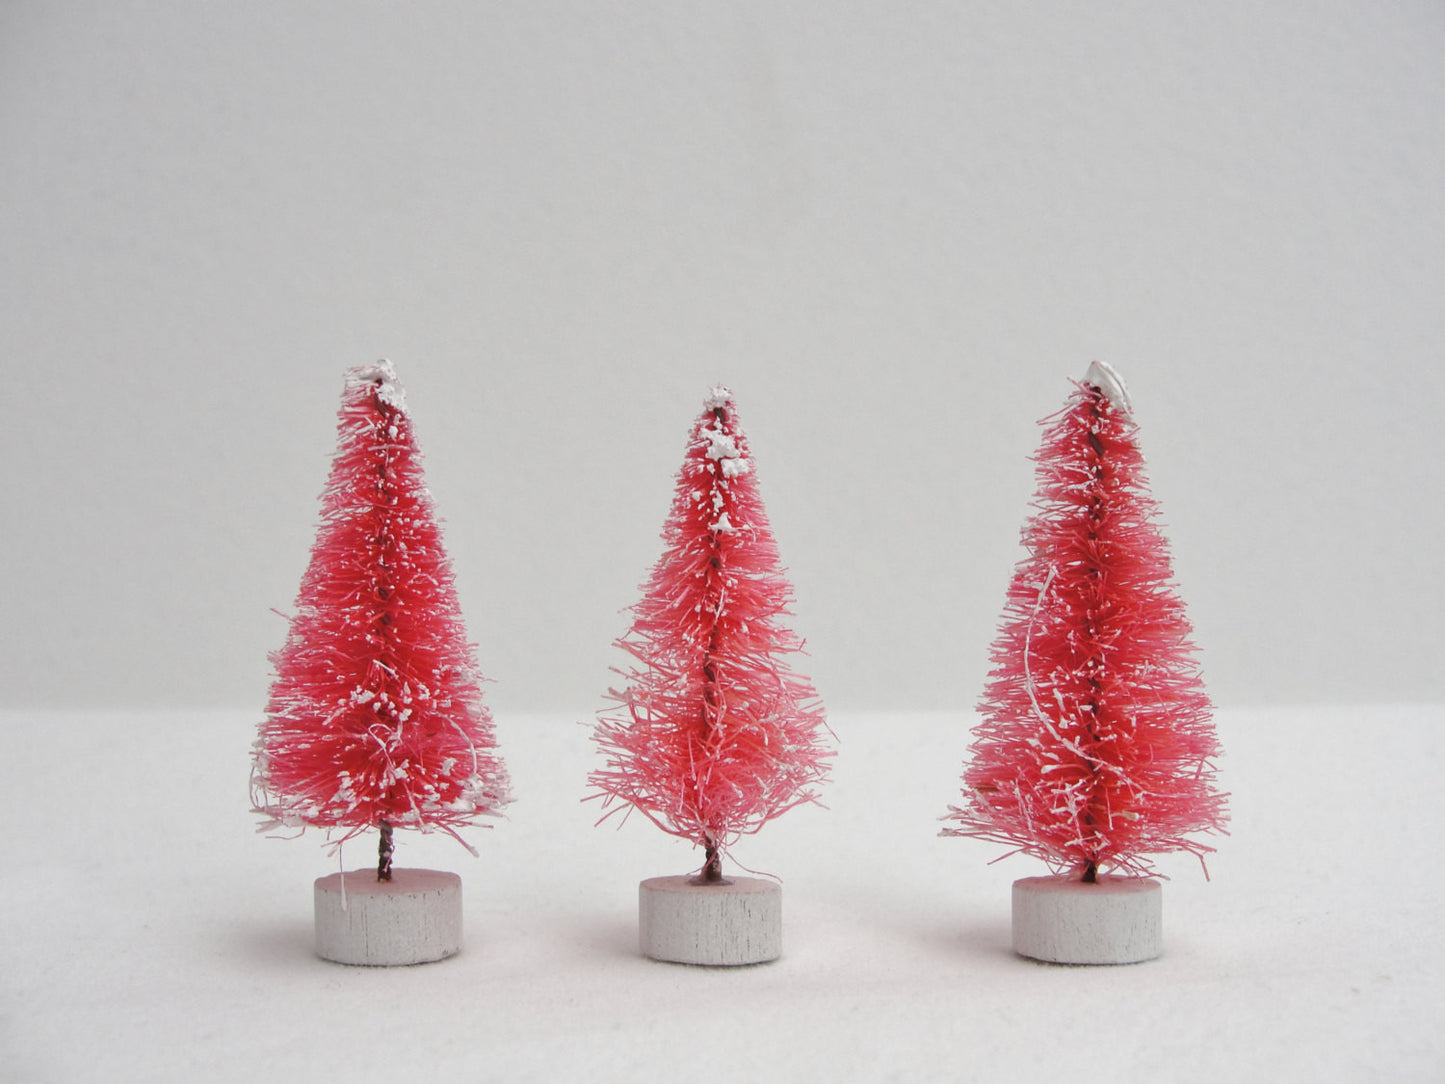 Frosted Pink bottle brush sisal trees 2" tall set of 3 - General Crafts - Craft Supply House